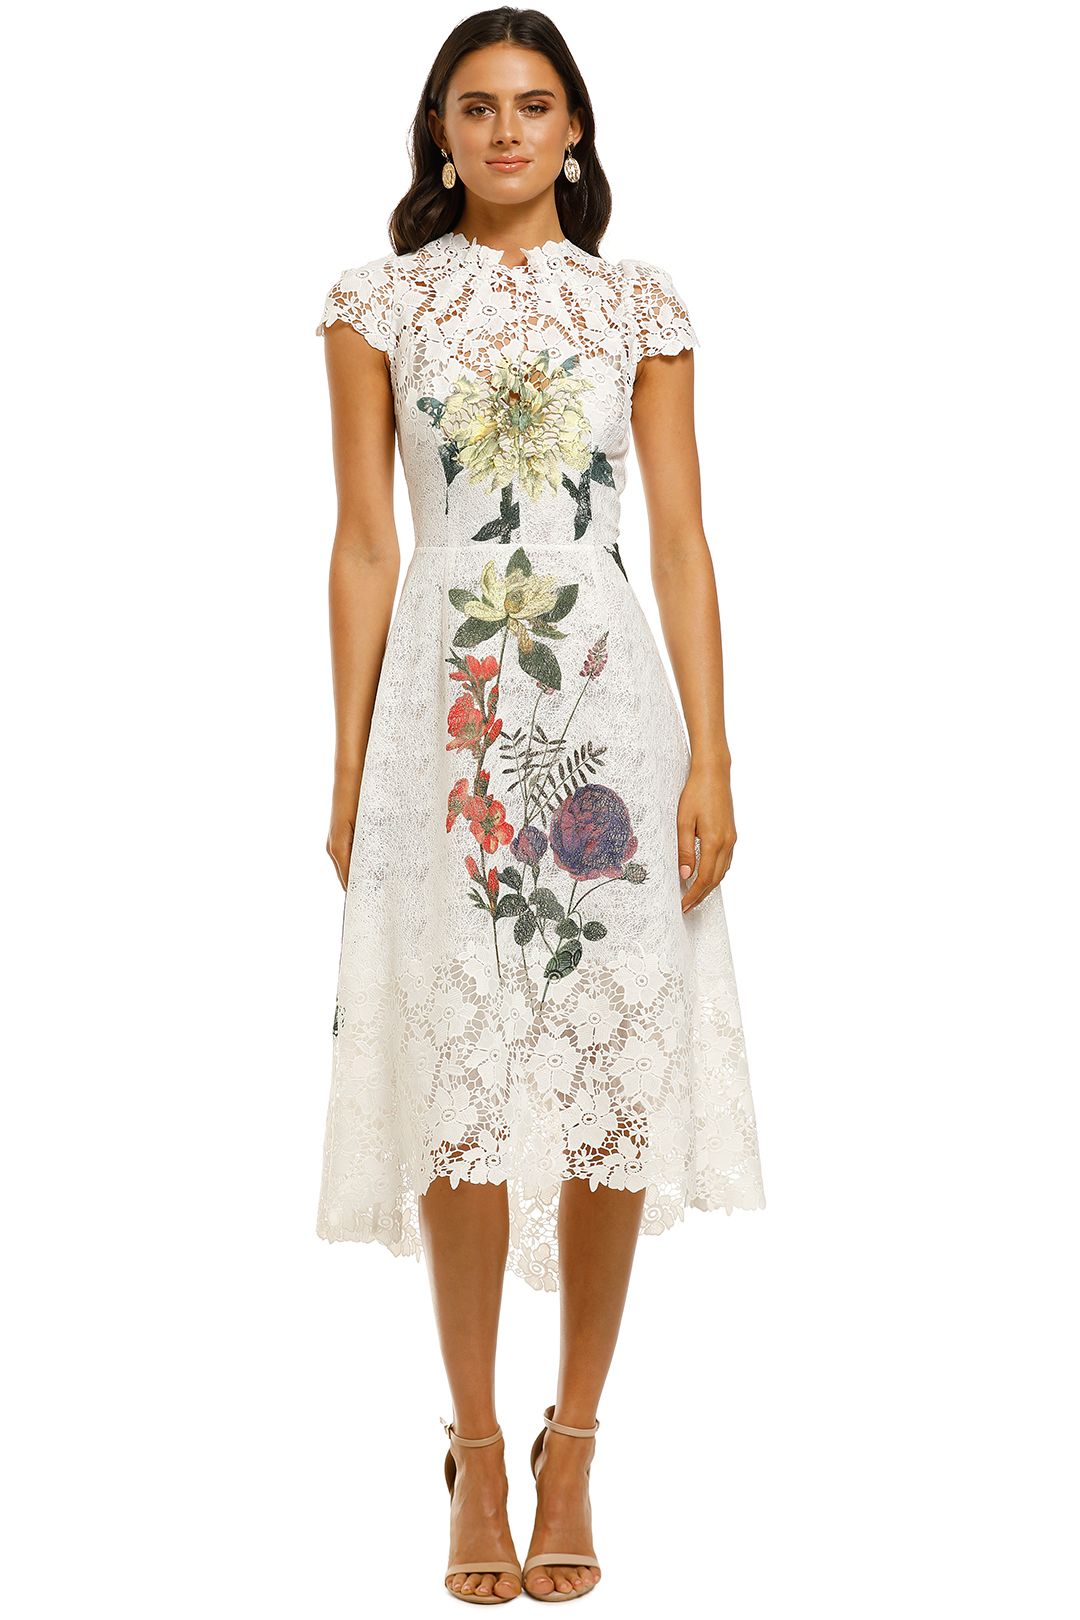 Moos-and-Spy-Fleur-Dress-White-Front